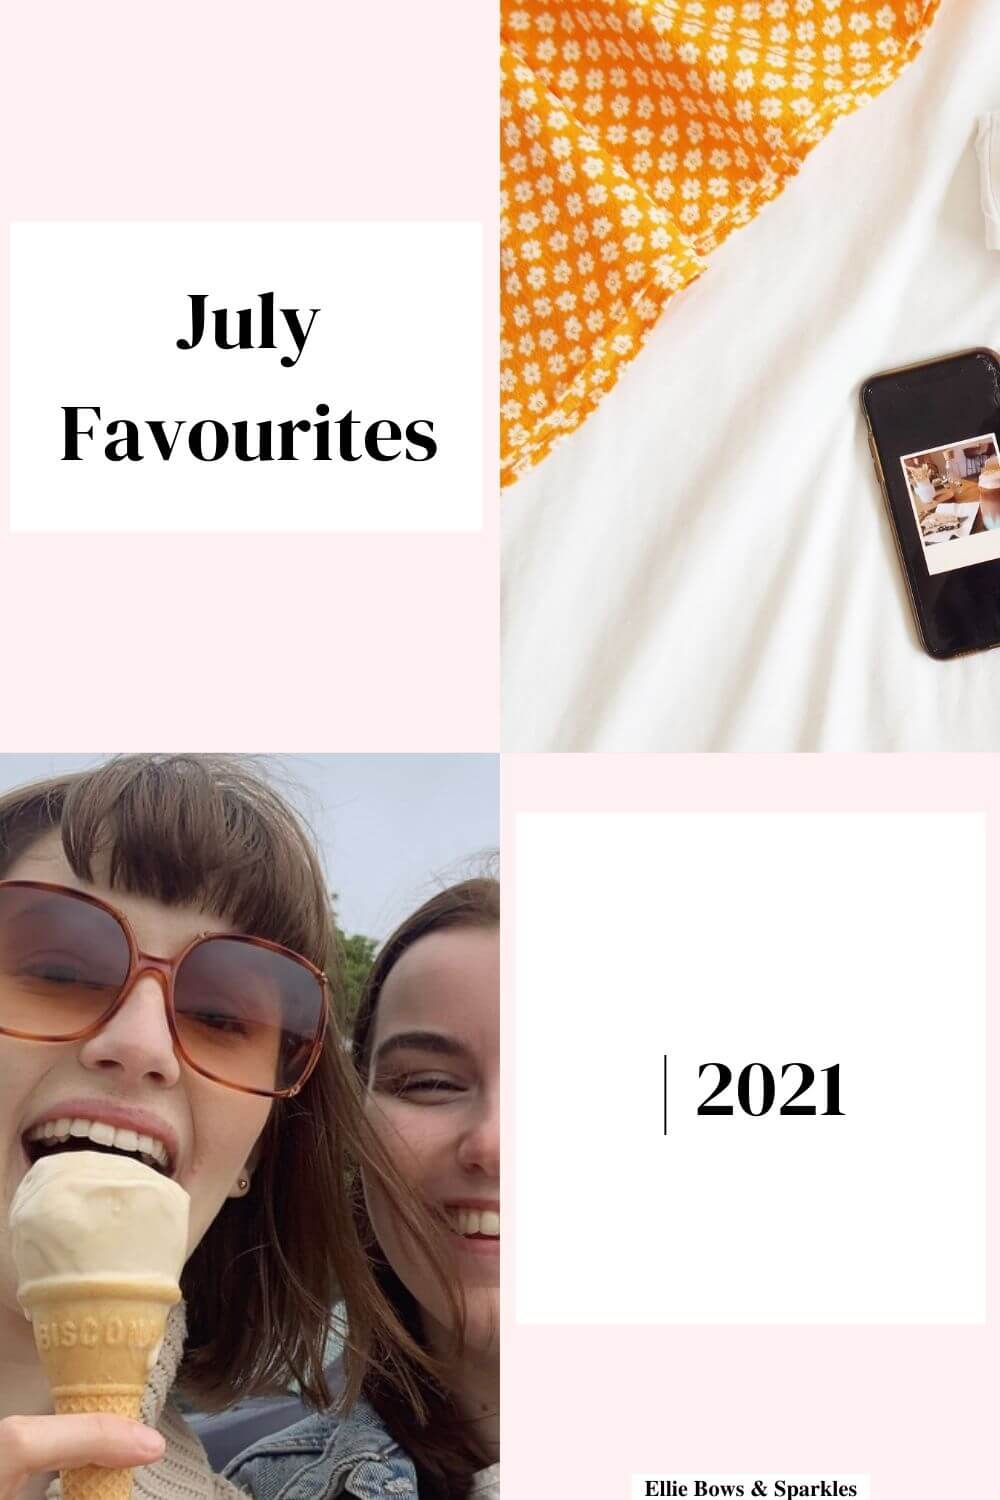 Pinterest pin featuring pictures of flatlay of favourites and Ellie and friend enjoying ice cream, split diagonally with two diagonal pink title boxes, reading "July Favourites 2021".